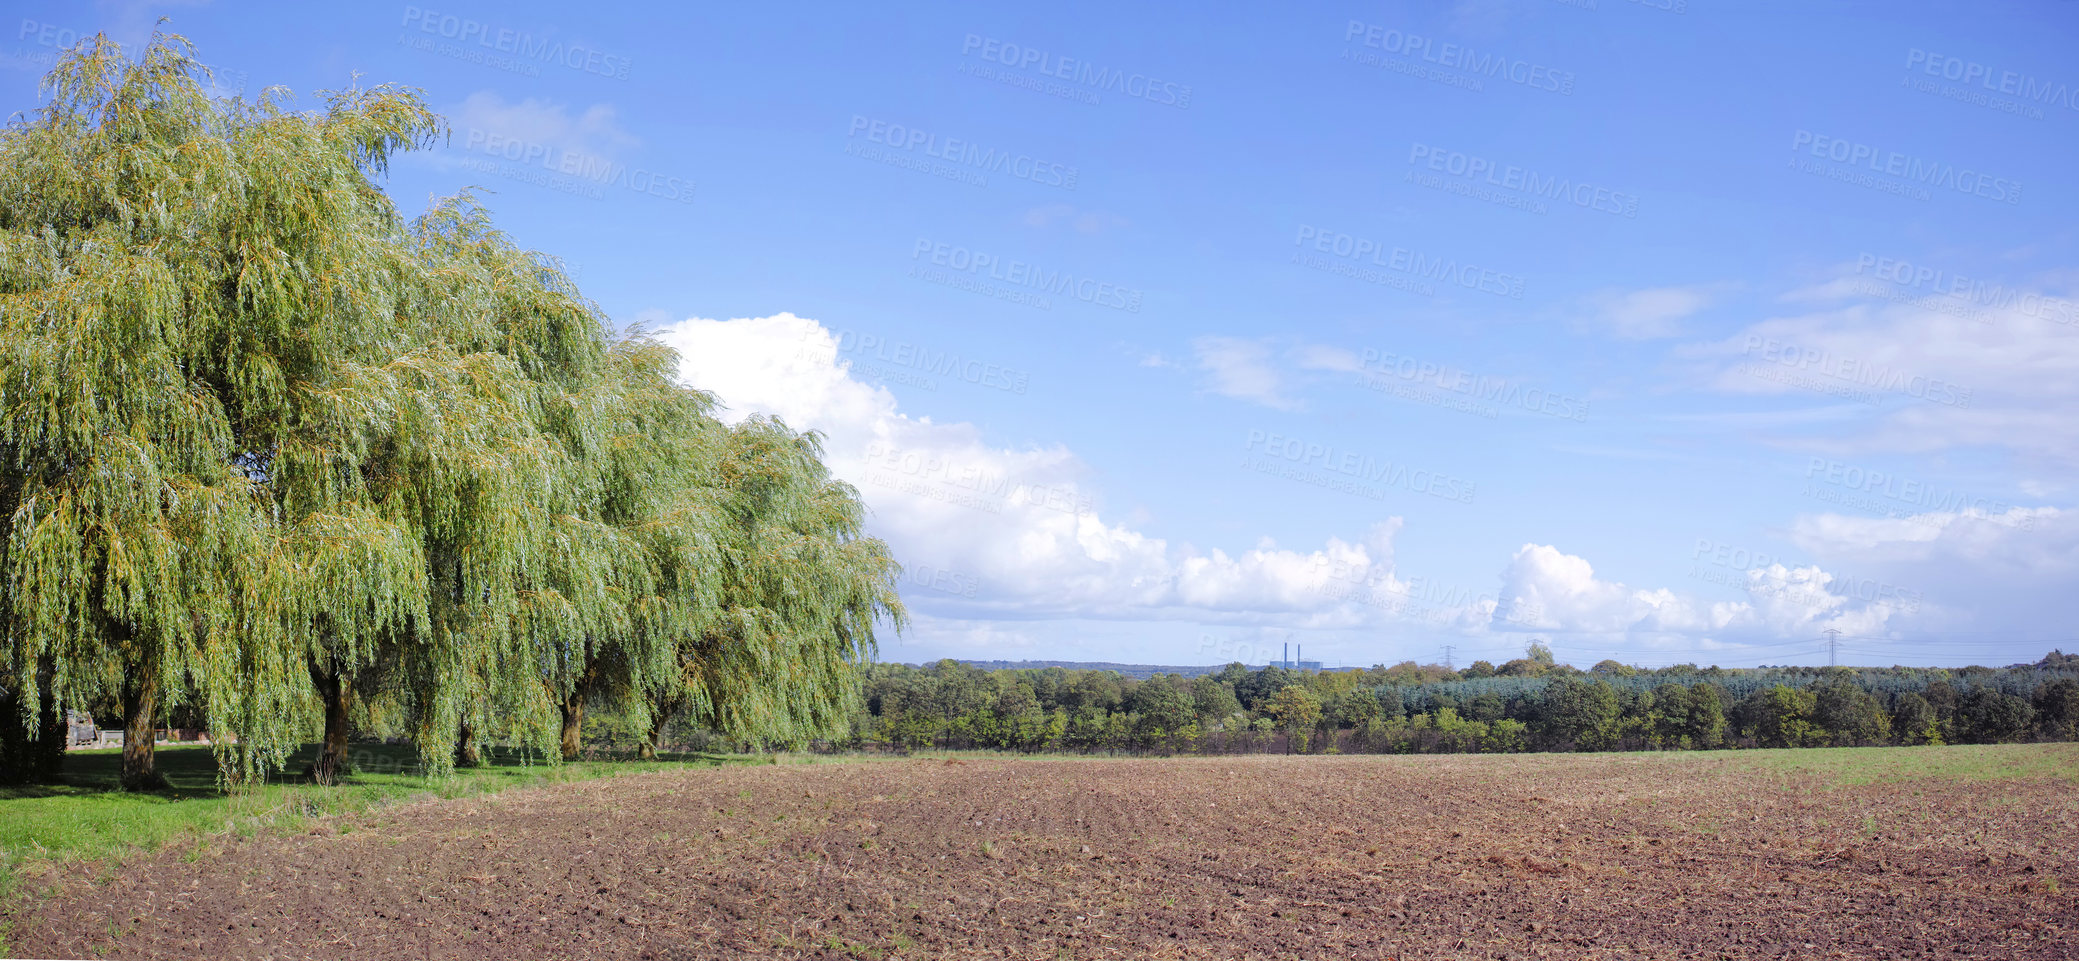 Buy stock photo A photo of the countryside in early springtime